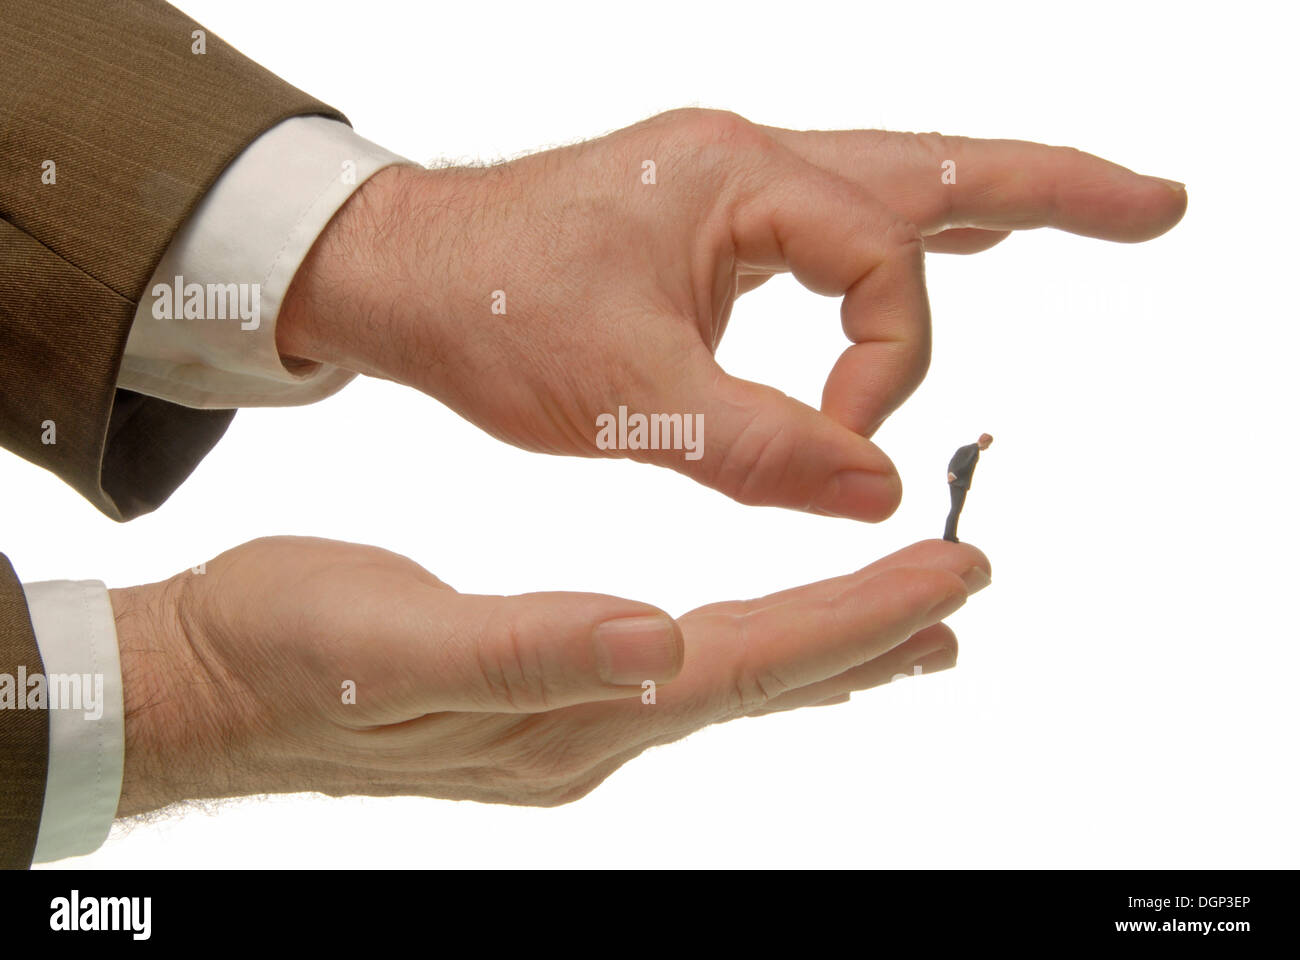 Flick finger Stock Vector Images - Page 2 - Alamy